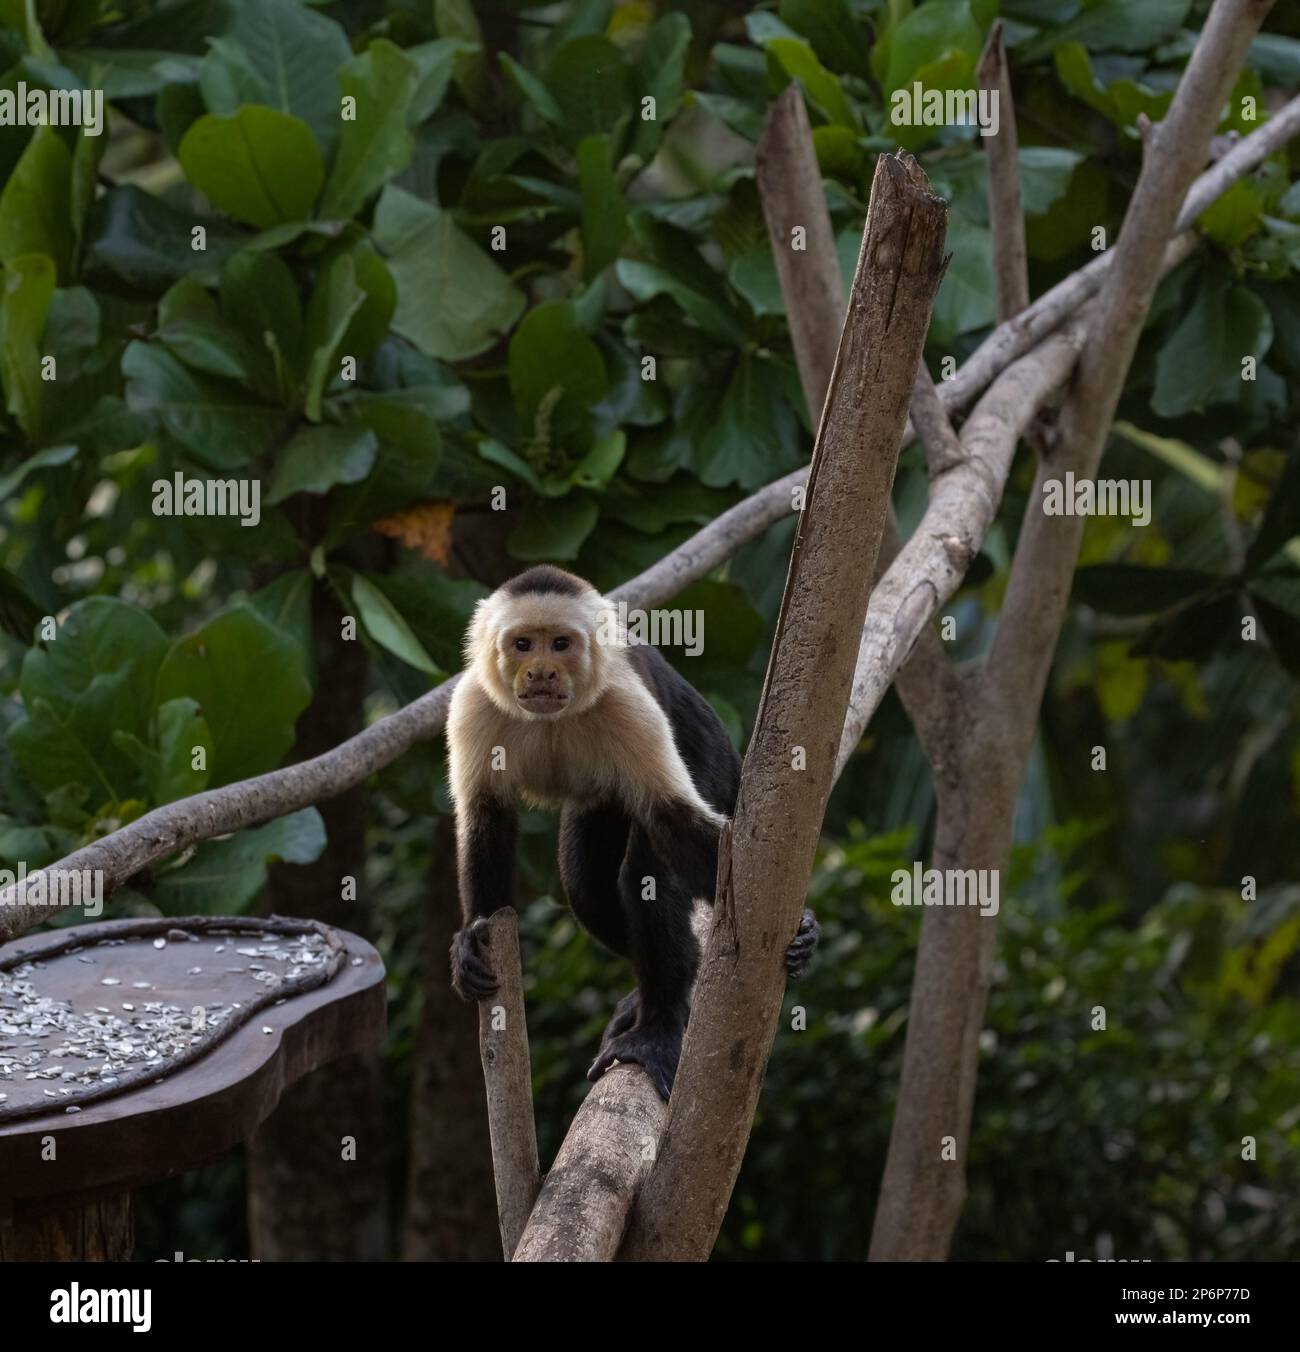 A White-faced monkey in a tree eyeing a tray of fruit in a garden in Costa Rica Stock Photo